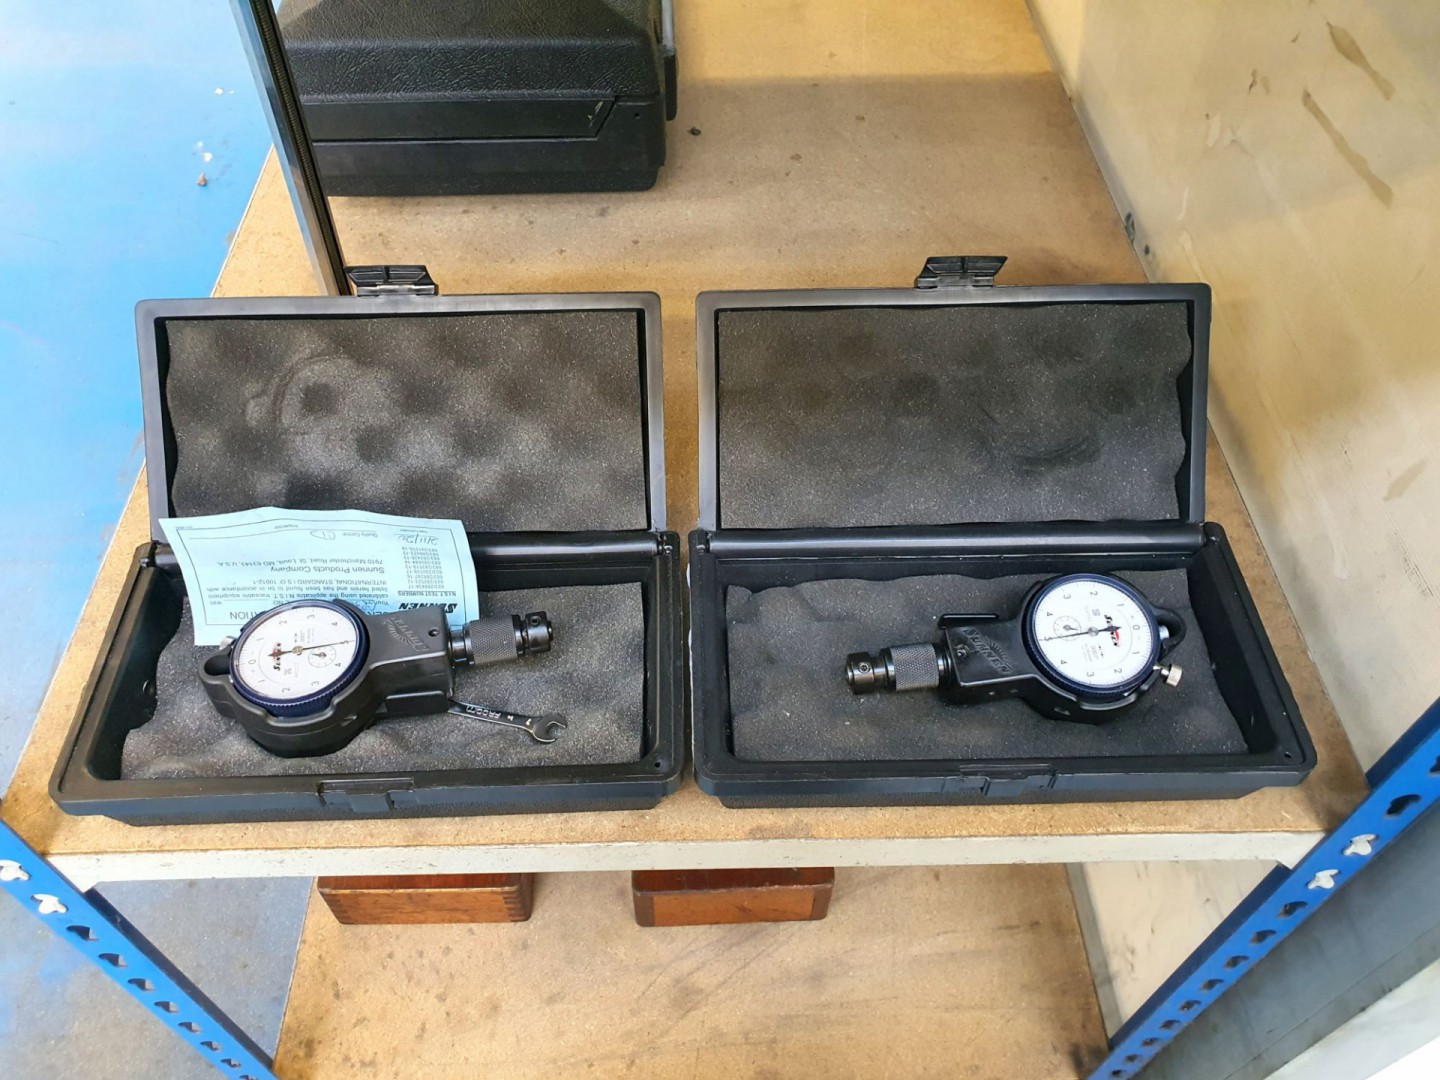 2x Sunnen GR-3000 dial indicators - lot located at...